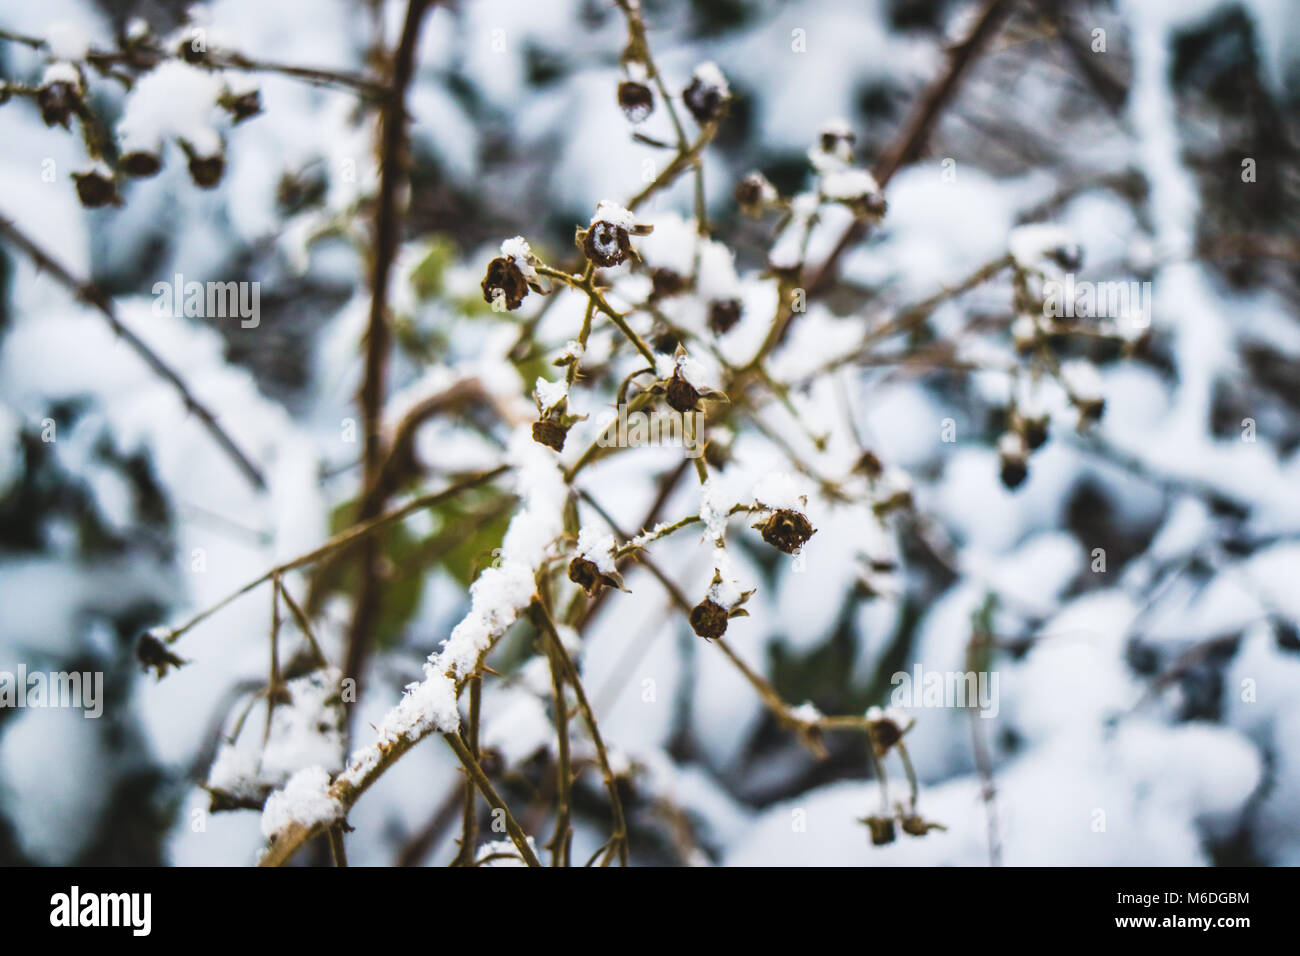 Close up of snow cover up branches and flowers with a blurry background in England. Stock Photo